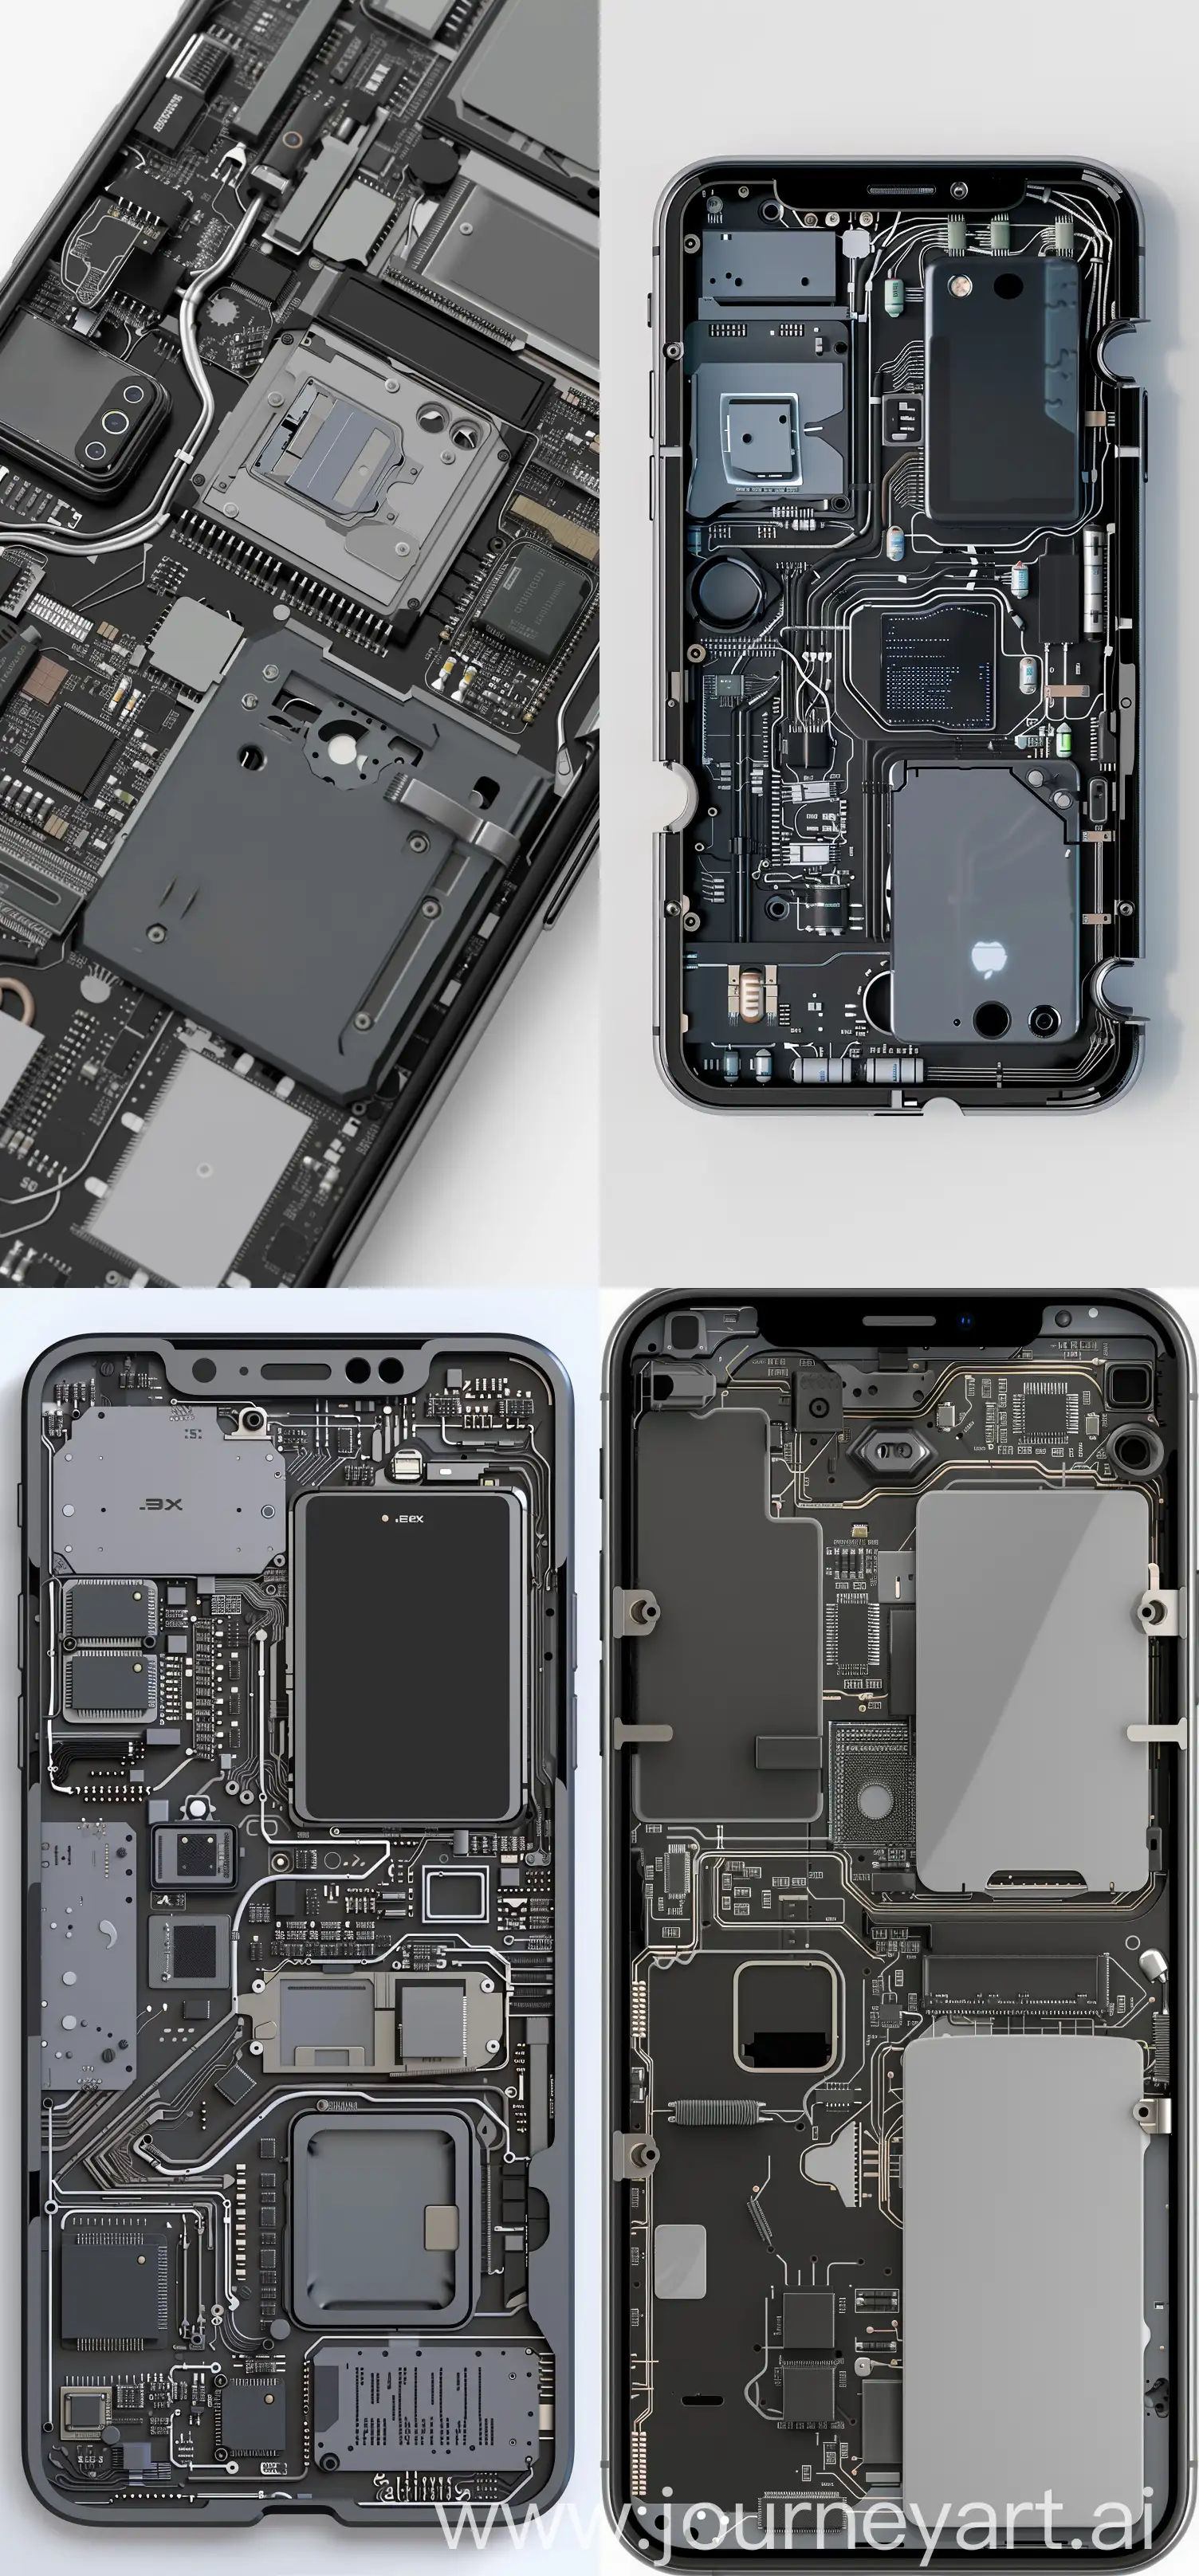 Top view of the inside structure and layout of an iPhone, detailed circuitry, wires, cables, screens, high resolution vector art on a white background with a dark grey color scheme using dark greys and metallic colors. High contrast, highly intricate details, highly detailed, high definition, high quality artwork in the style of hyperrealism with intricate details, textures and sharp focus reminiscent of hyper photorealism  --ar 47:101 --s 50 --v 6 